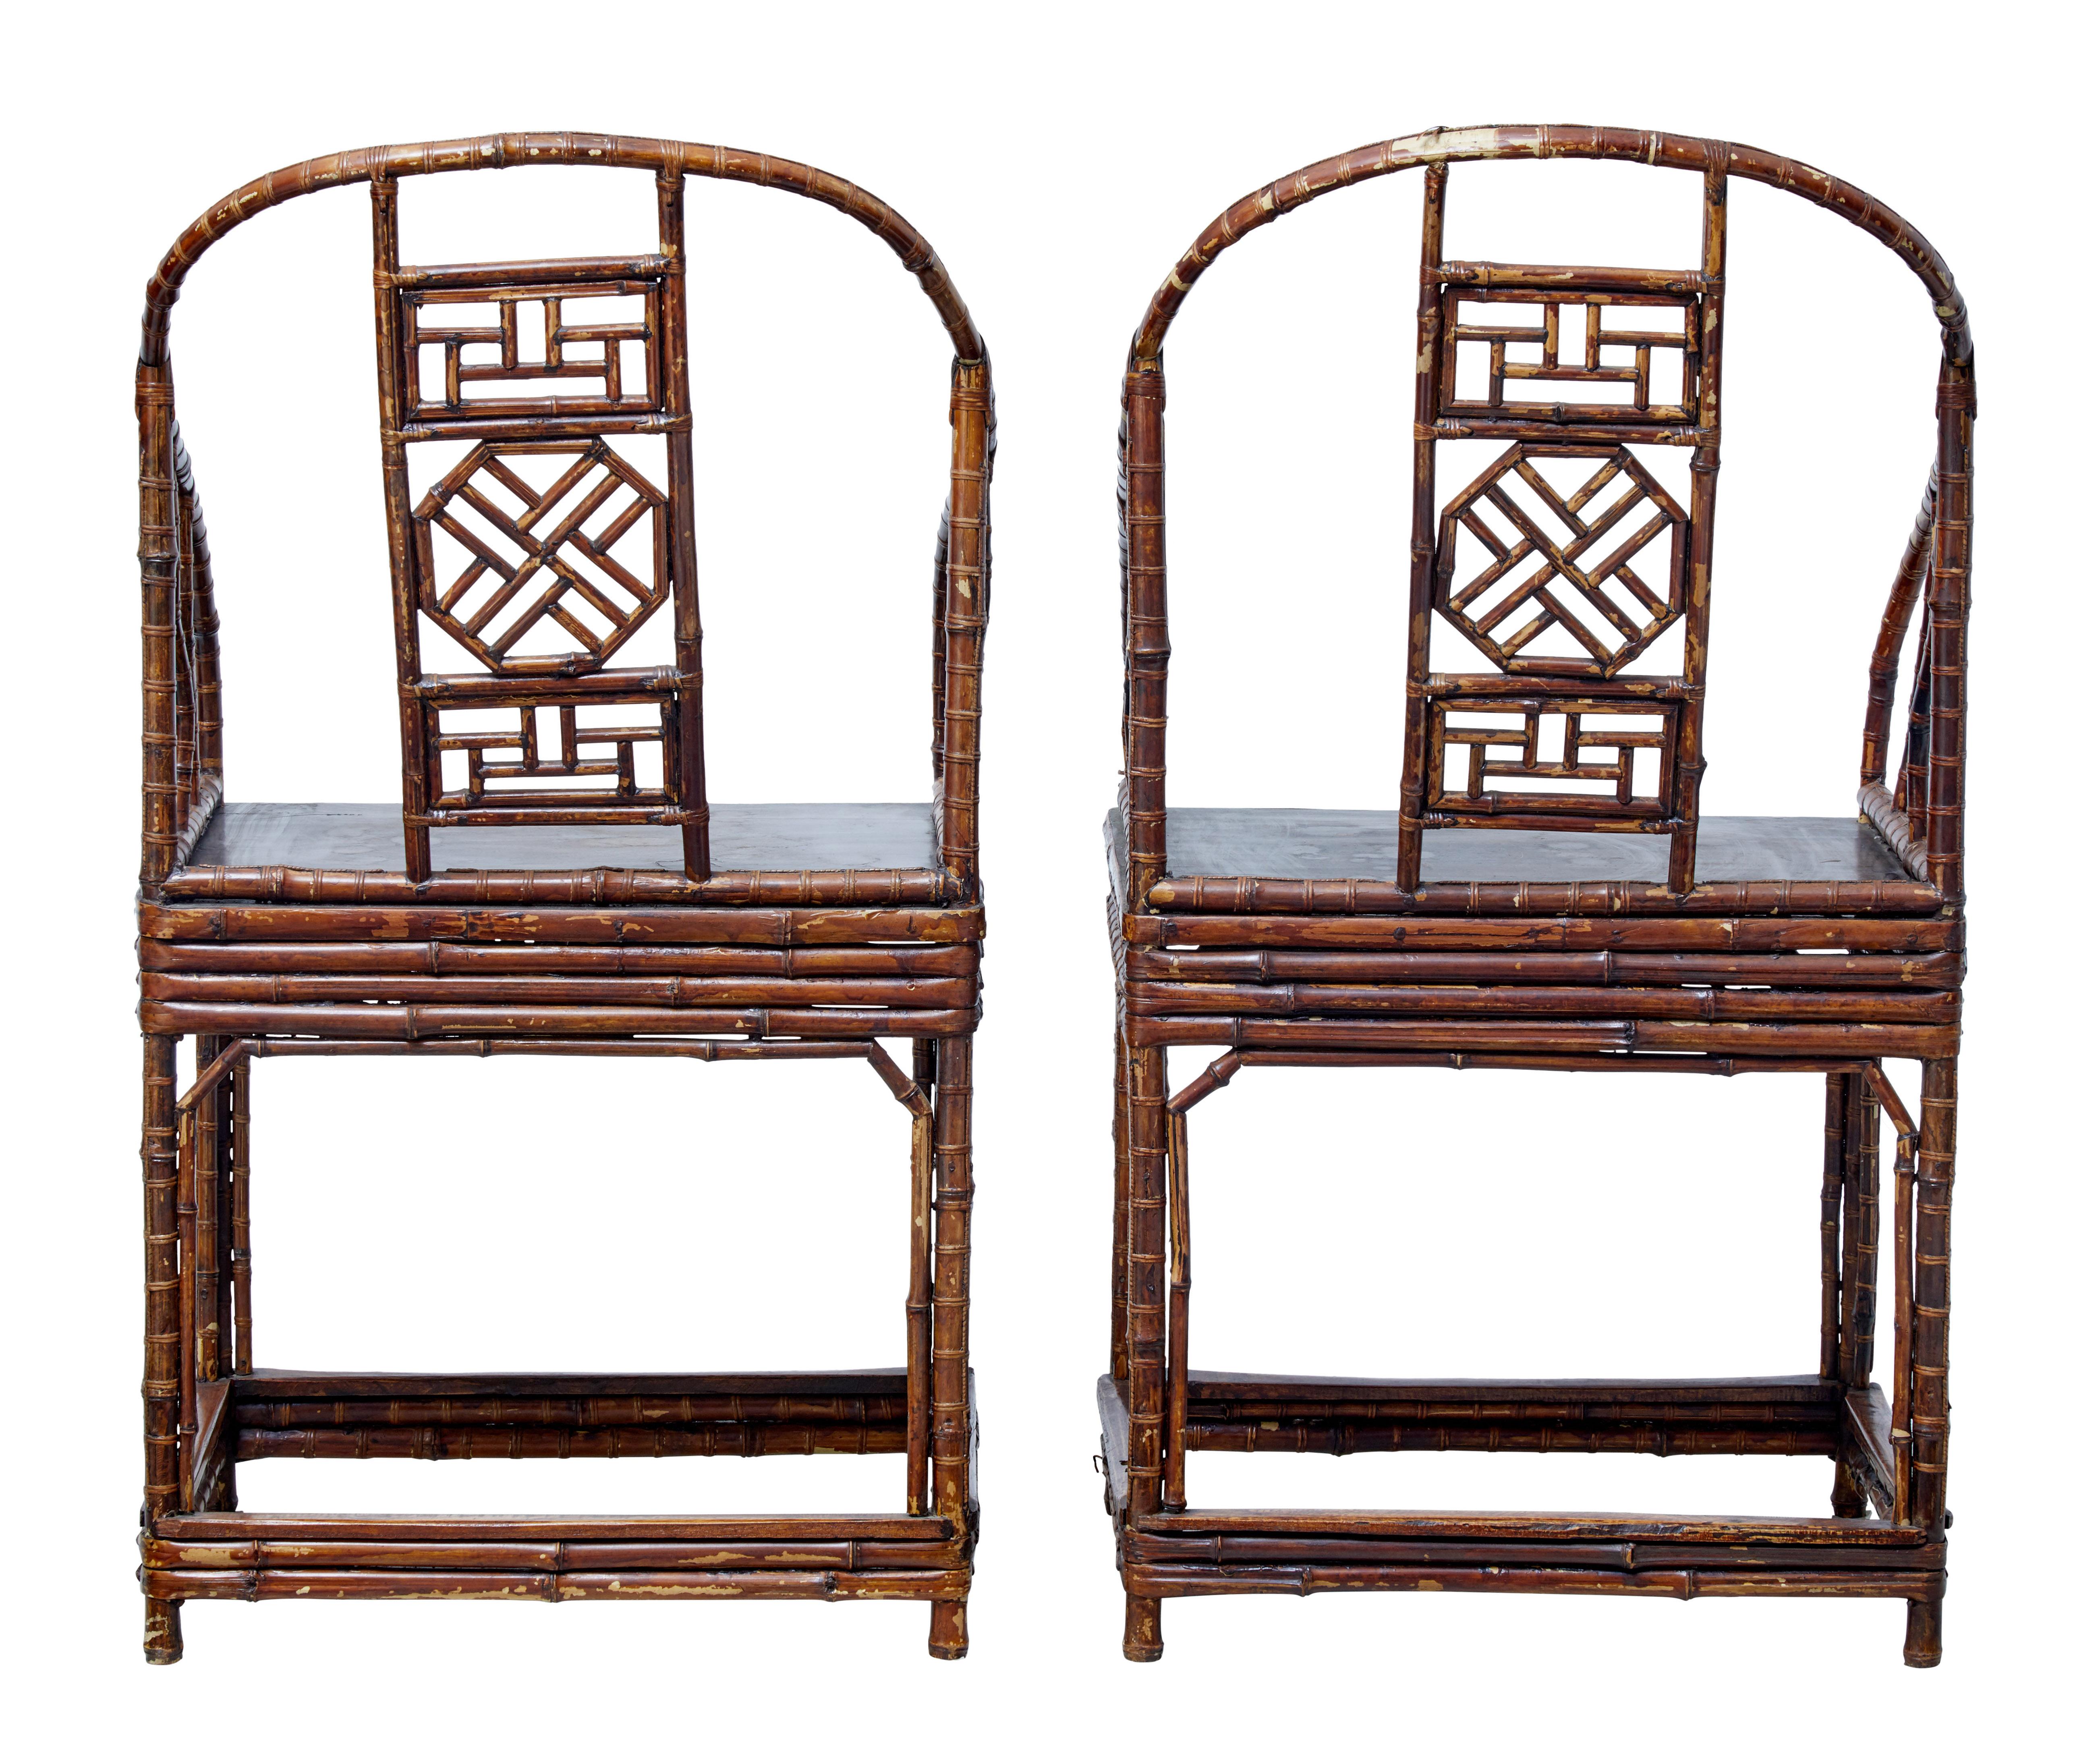 Pair of Chinese export canework chairs, circa 1890.

Good elegant examples of this Chinese craft.

Made from thin cane which has been multi layered for reinforcement. Shaped back with further canework detailing in the backrest. Plain flat seat